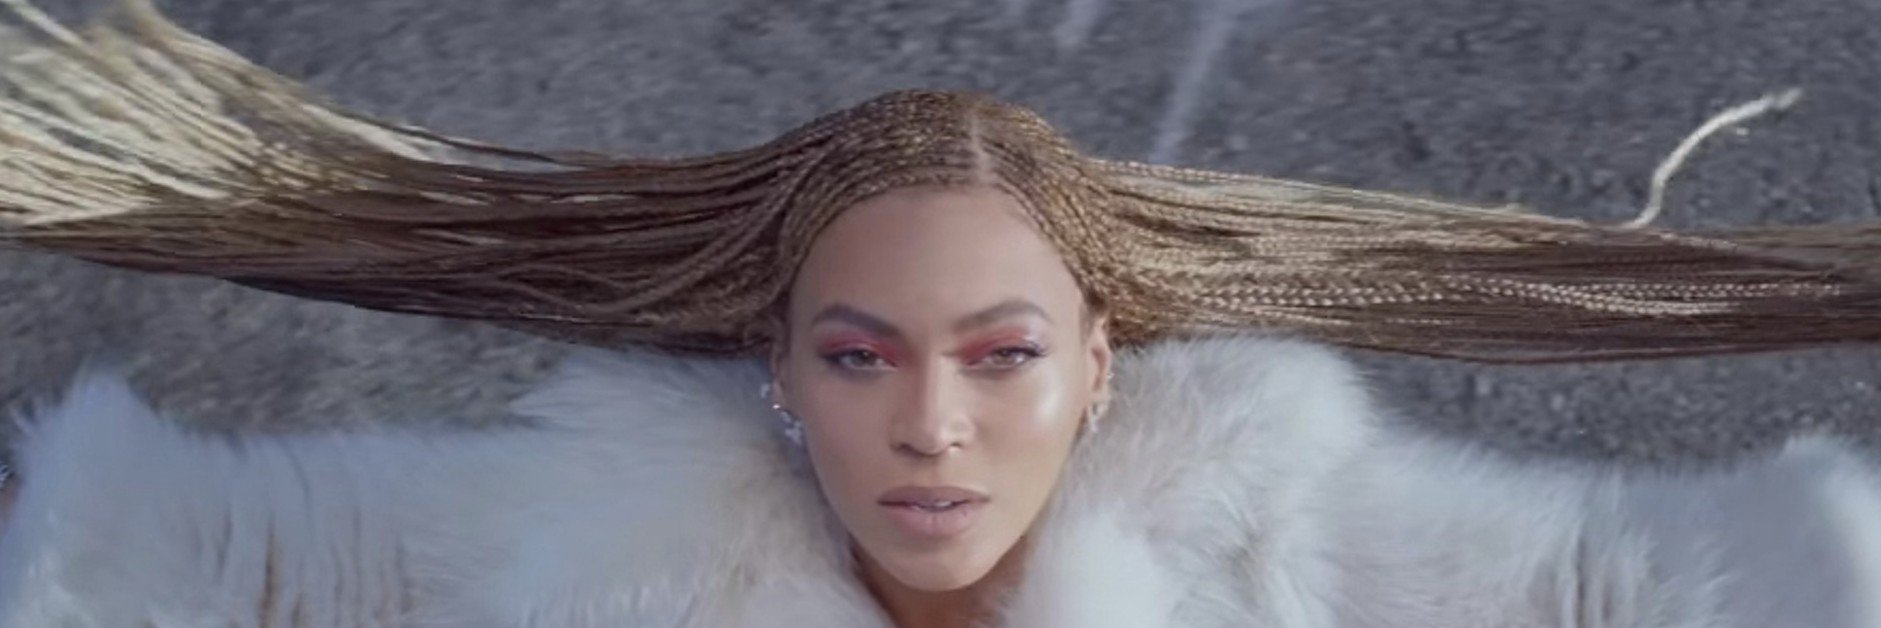 Image for Beyoncé, Red Lobster and Harvard Business School: Unlikely Bedfellows?